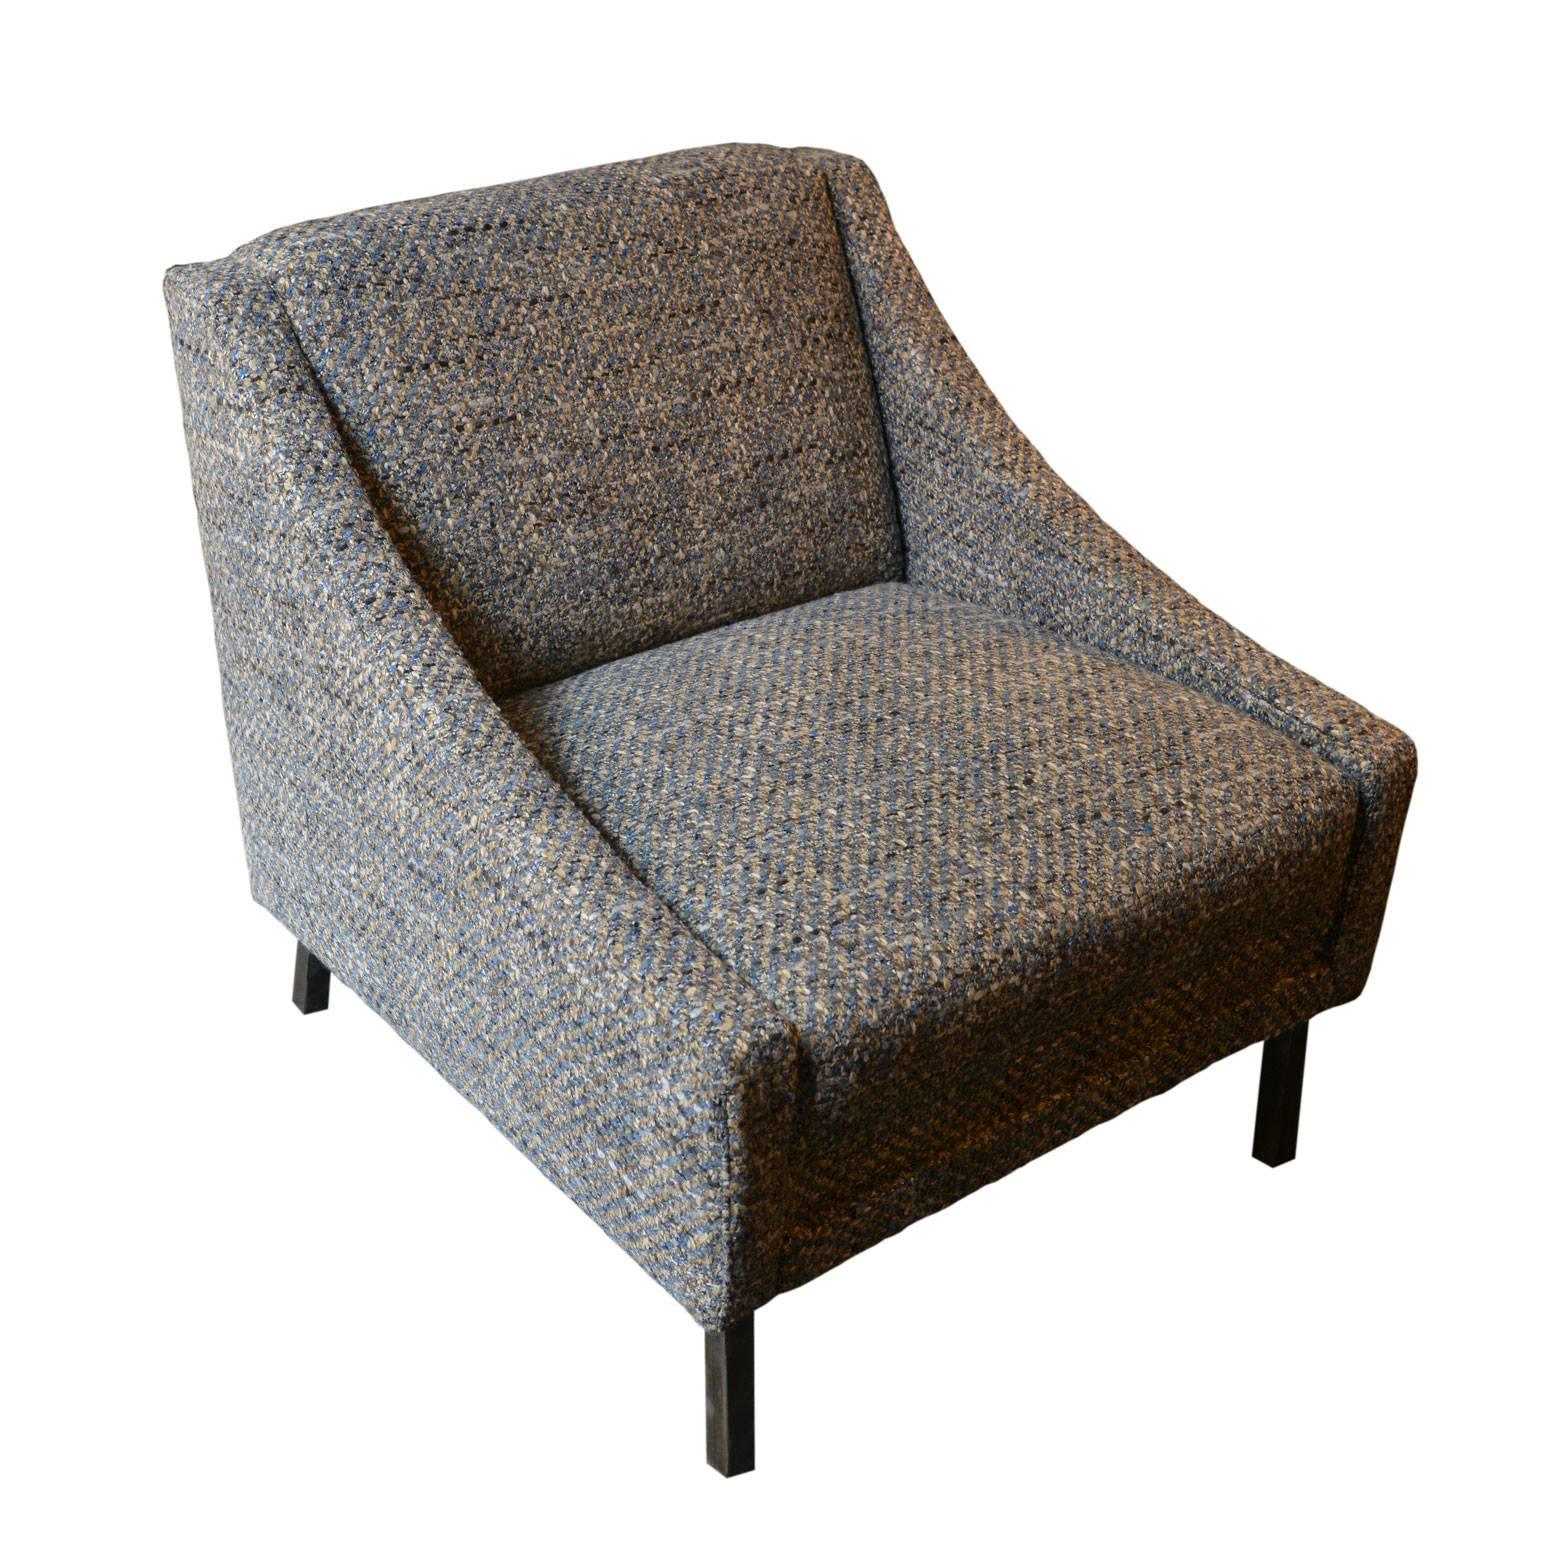 The original vintage structure has been reupholstered reupholstered in a light blue, white, pink and gray wool bouclé. The simple metal feet are in burnt iron.